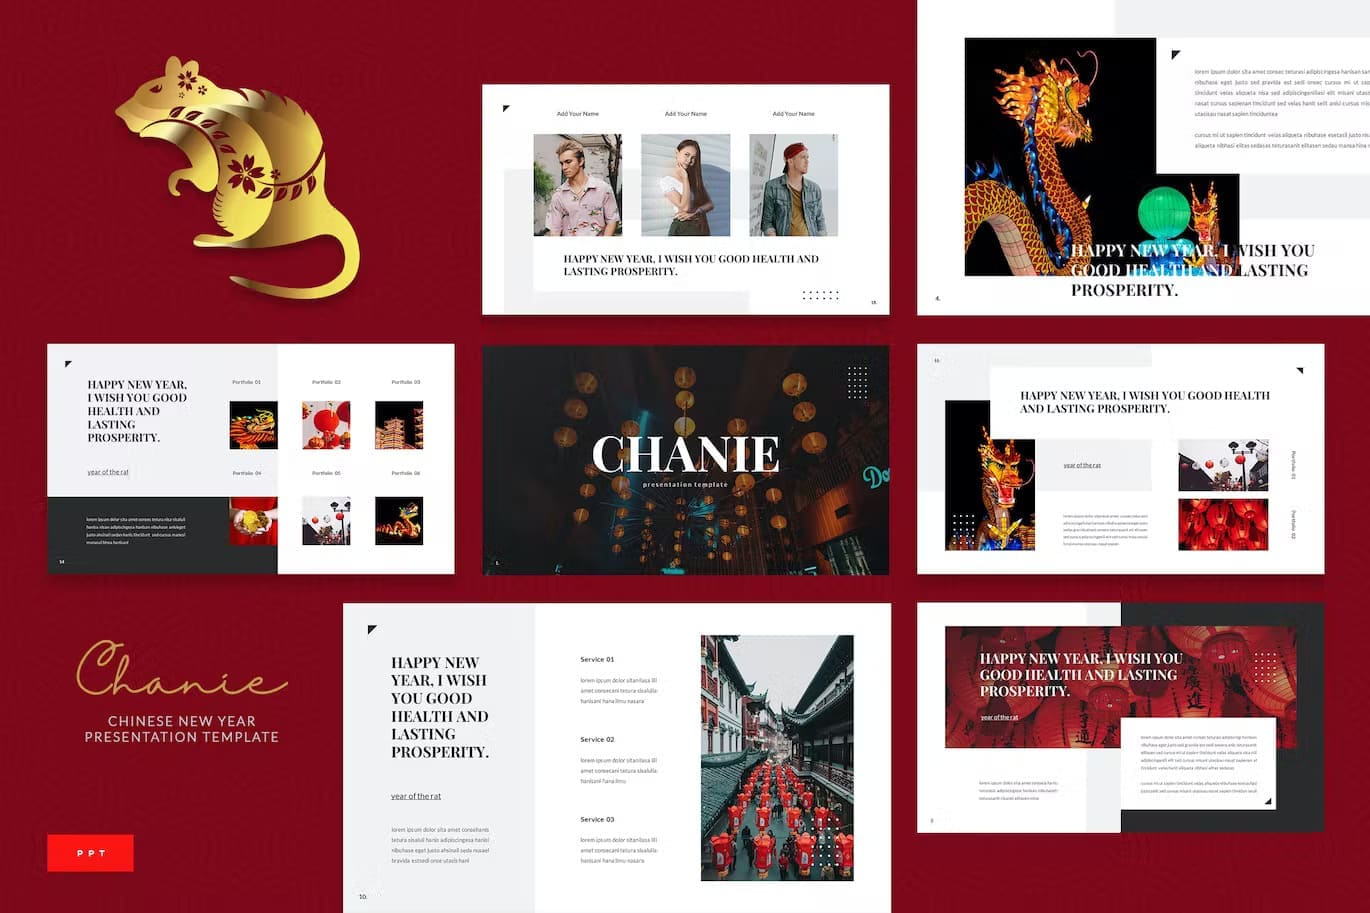 18 slides of the template Chanie - Chinese new year.